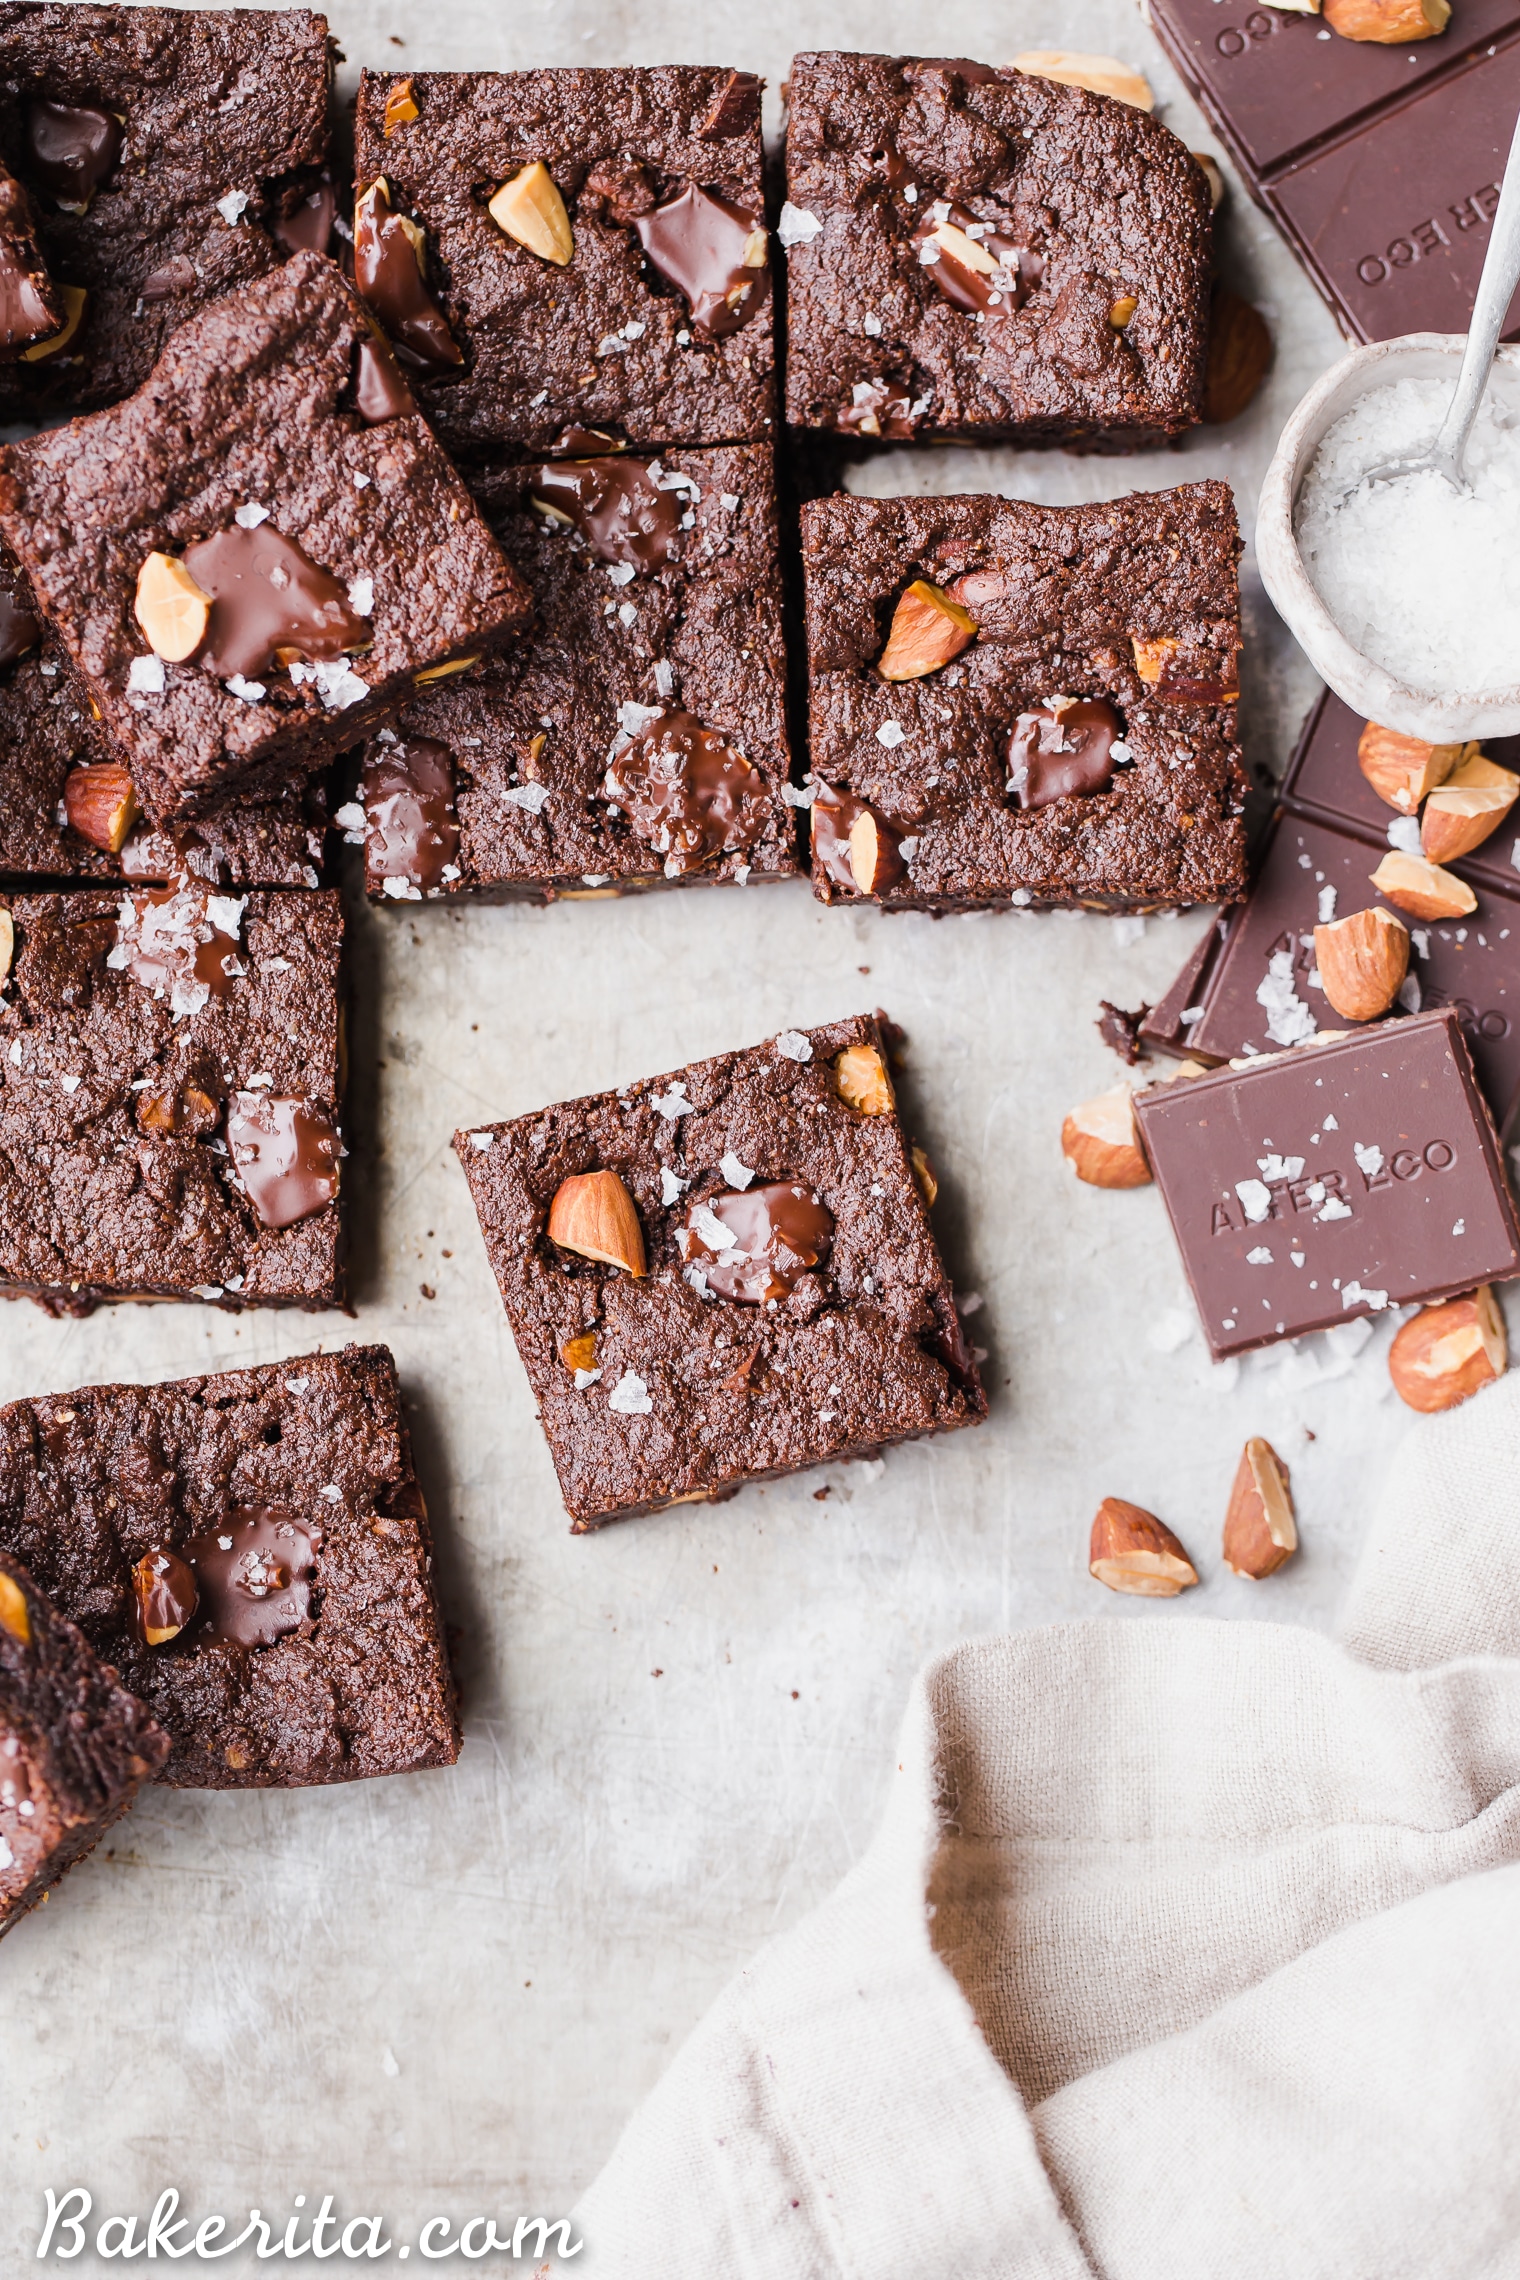 You'd never guess these super fudgy Salted Almond Brownies are gluten-free, paleo and vegan, because they taste just as good as a traditional brownie! They're incredibly fudgy and chocolatey and the toasted almonds and sea salt make them even better.